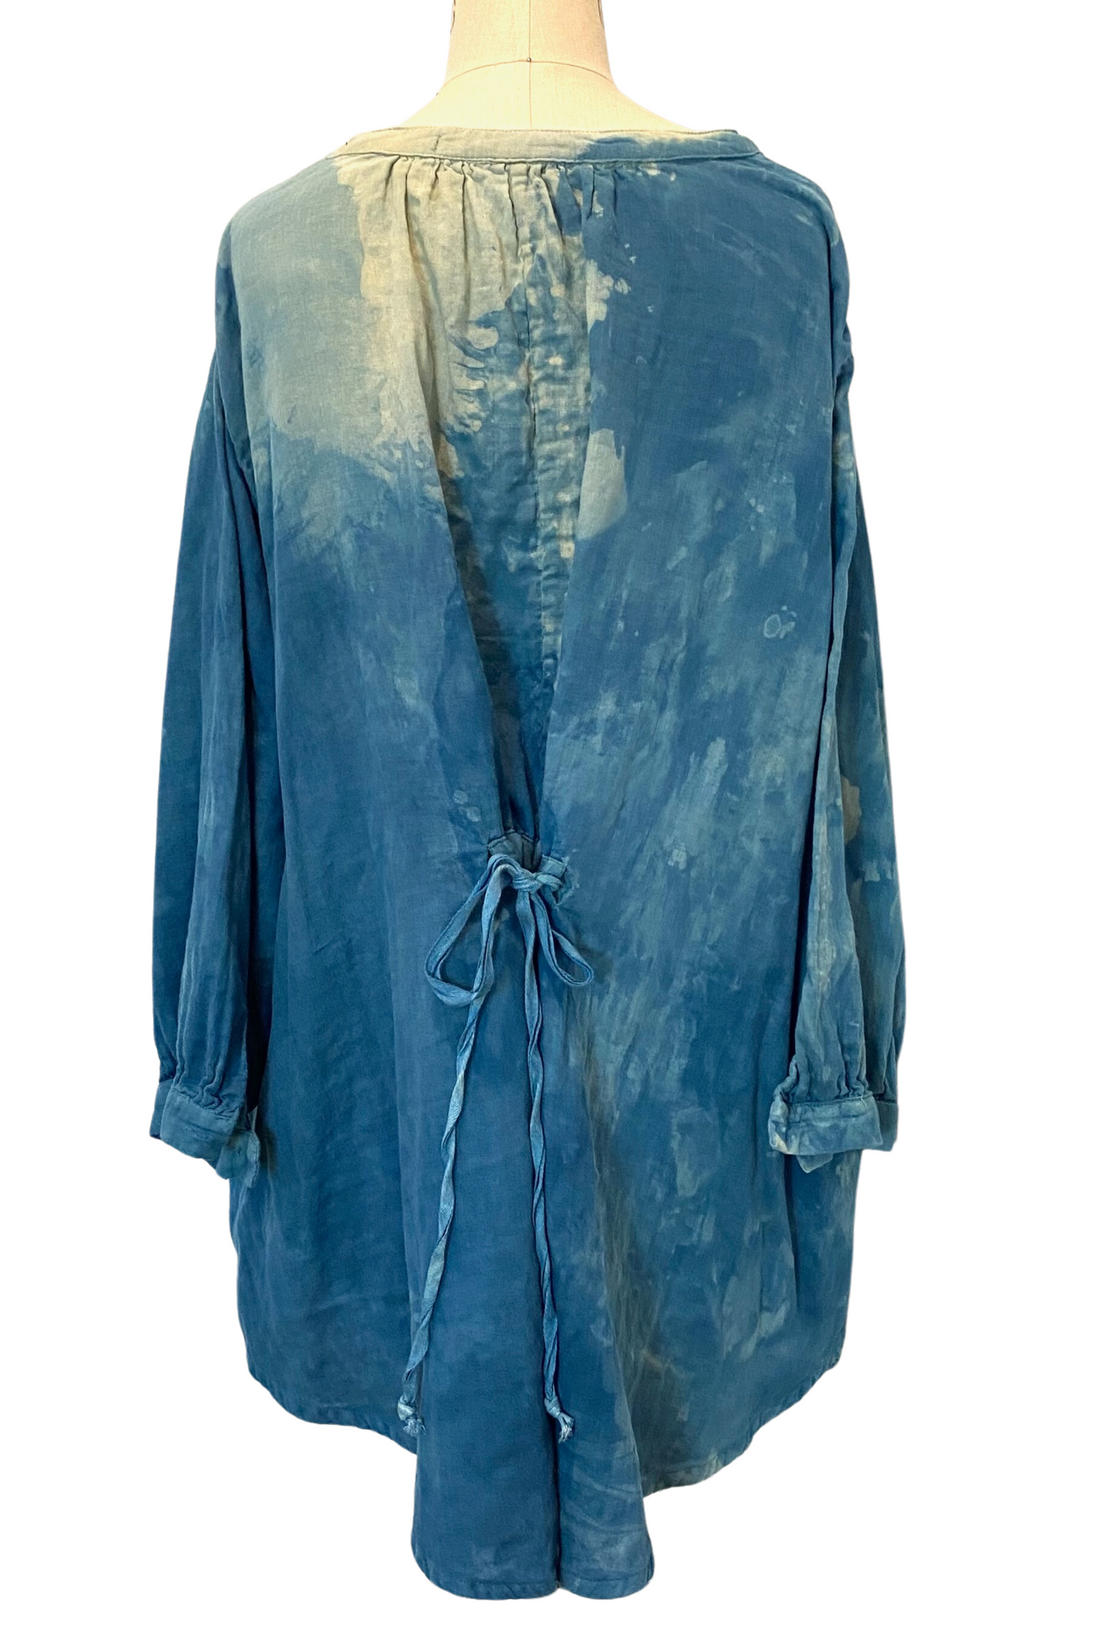 Tunic in Blue Mist |Botanically Dyed Cotton